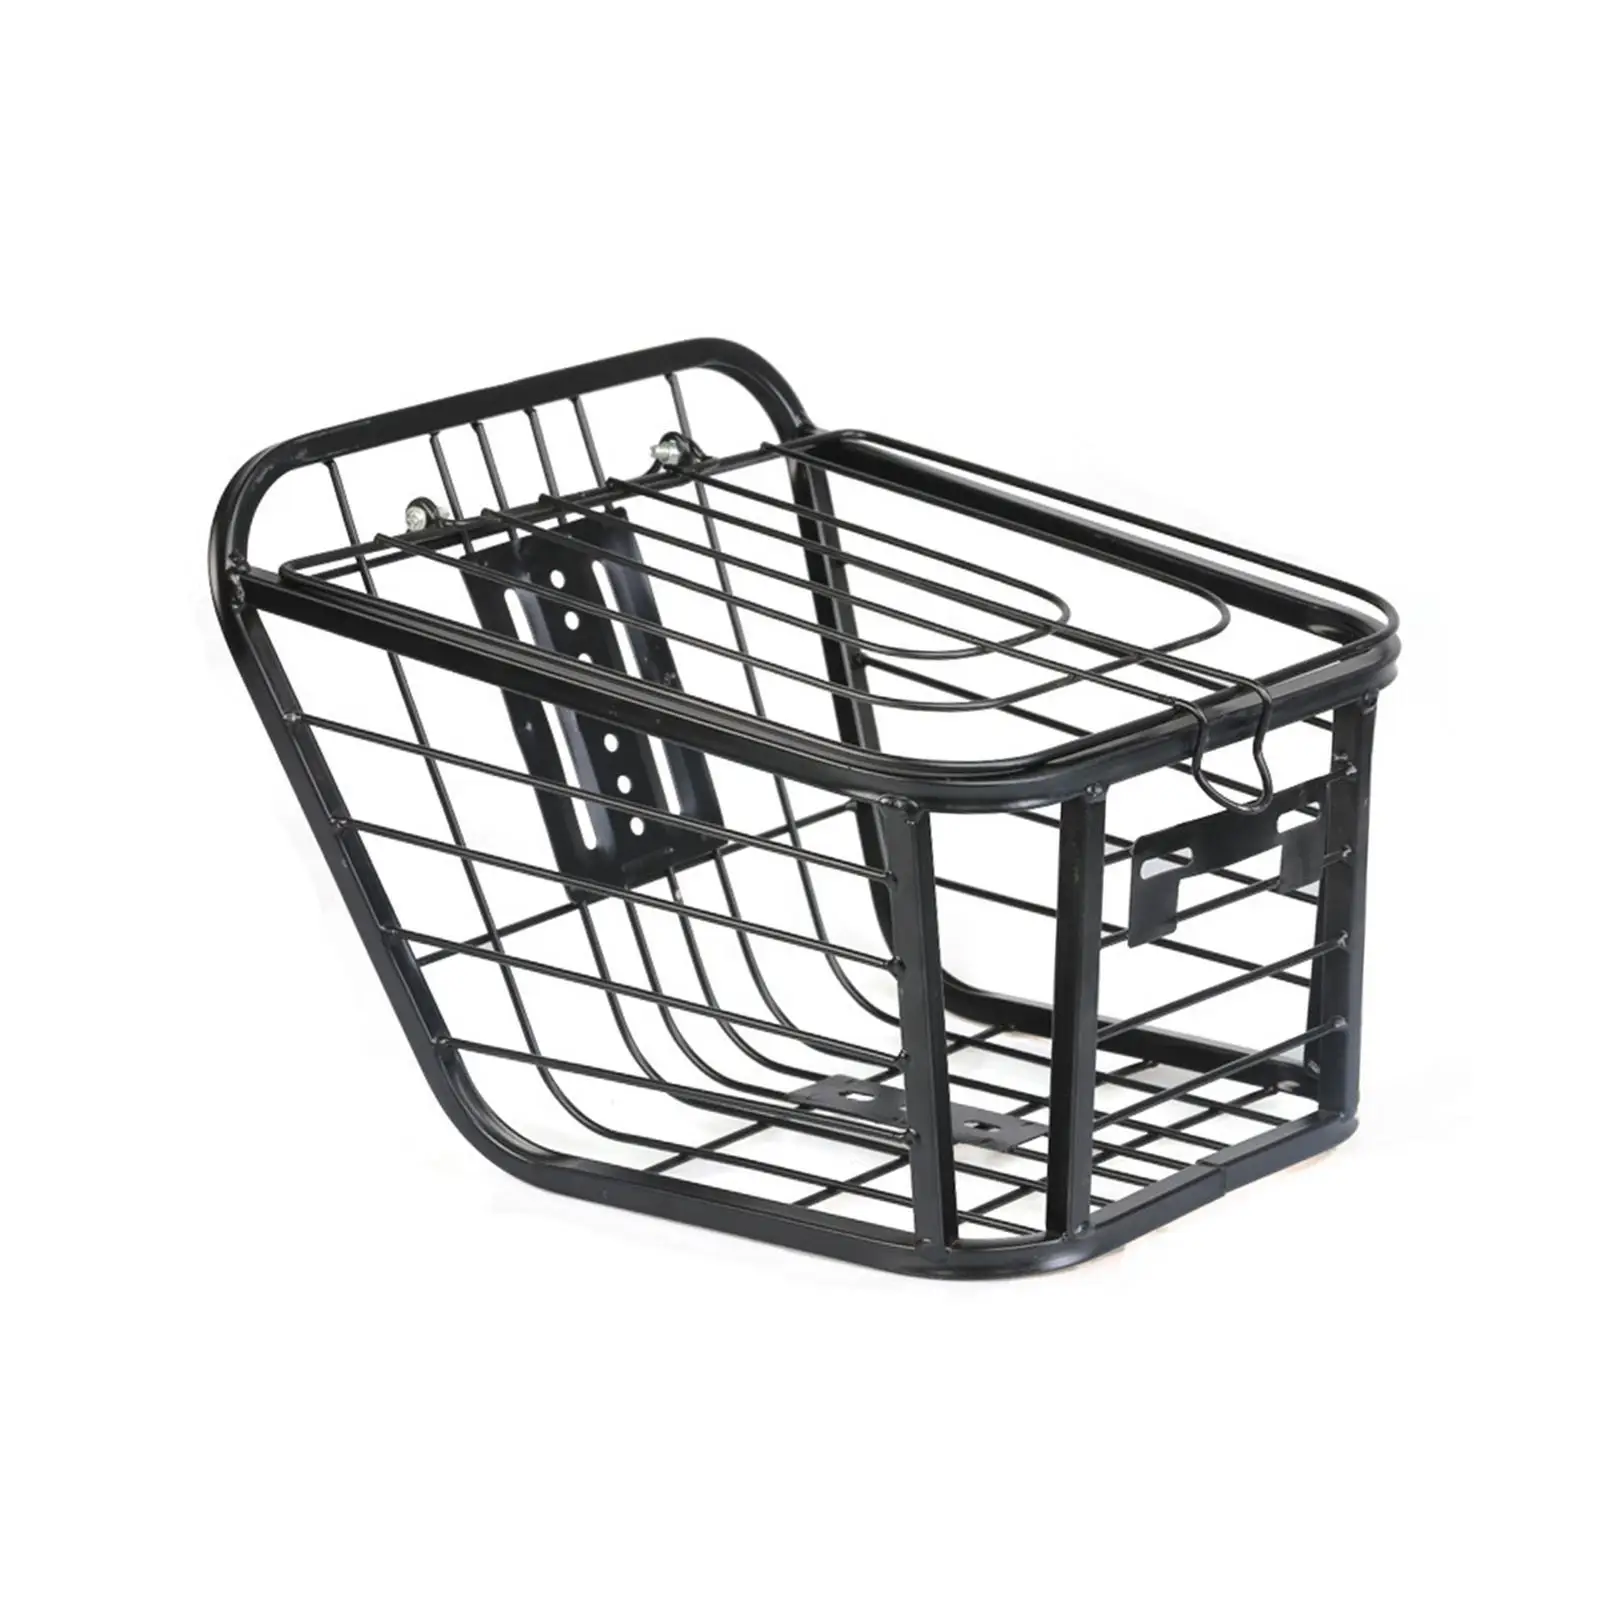 Rear Bike Basket Durable Hanging Wire Mesh Basket Bicycle Storage Basket for Cycling Road Bike Travel Women`s and Men`s Riding